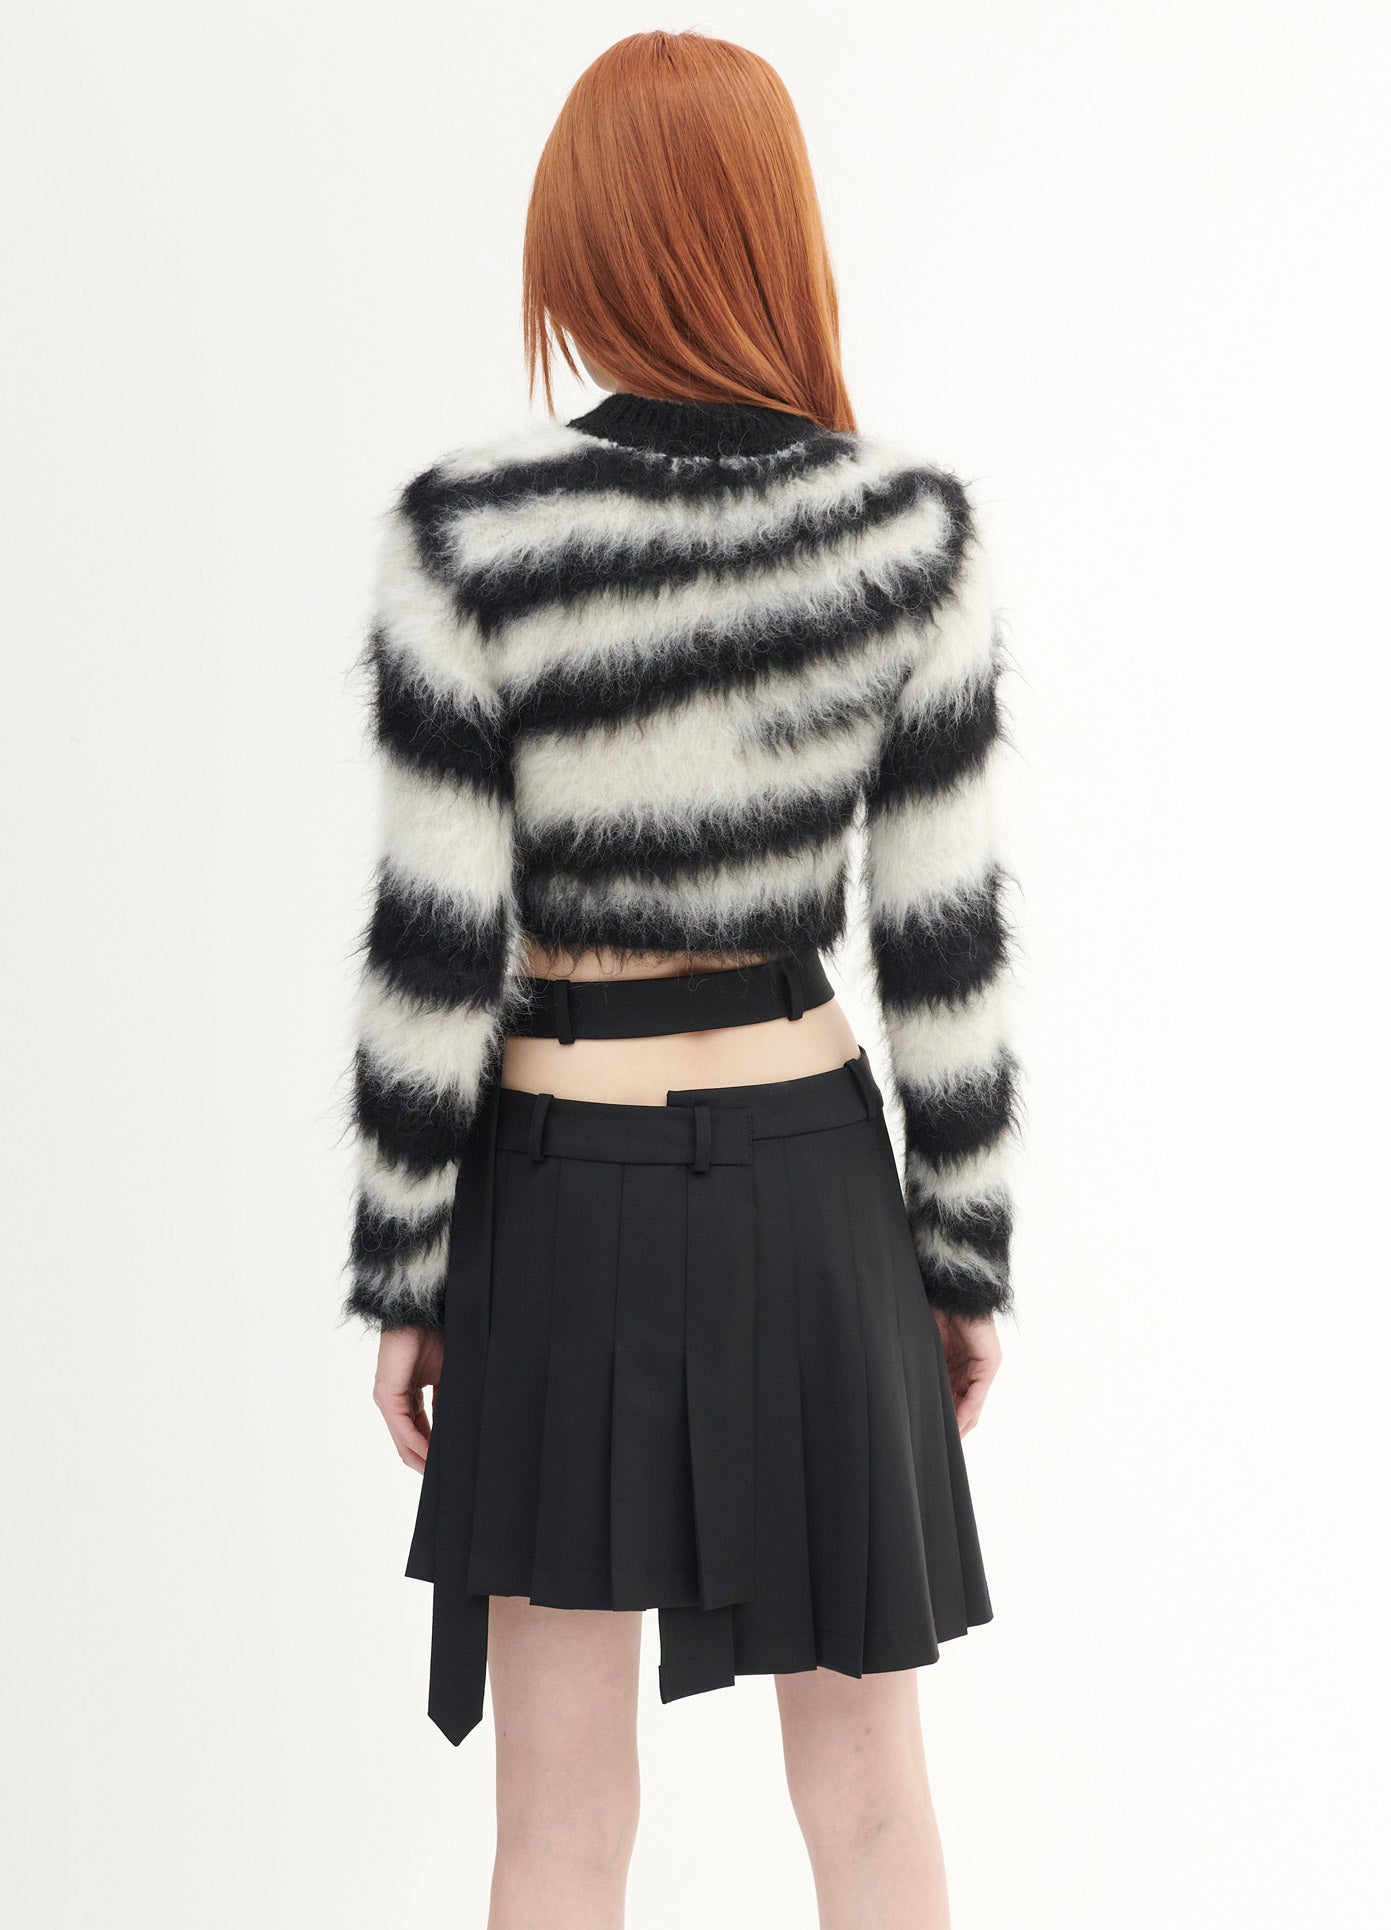 MONSE Zebra Alpaca Cropped Sweater in Black and Ivory on Model Back View